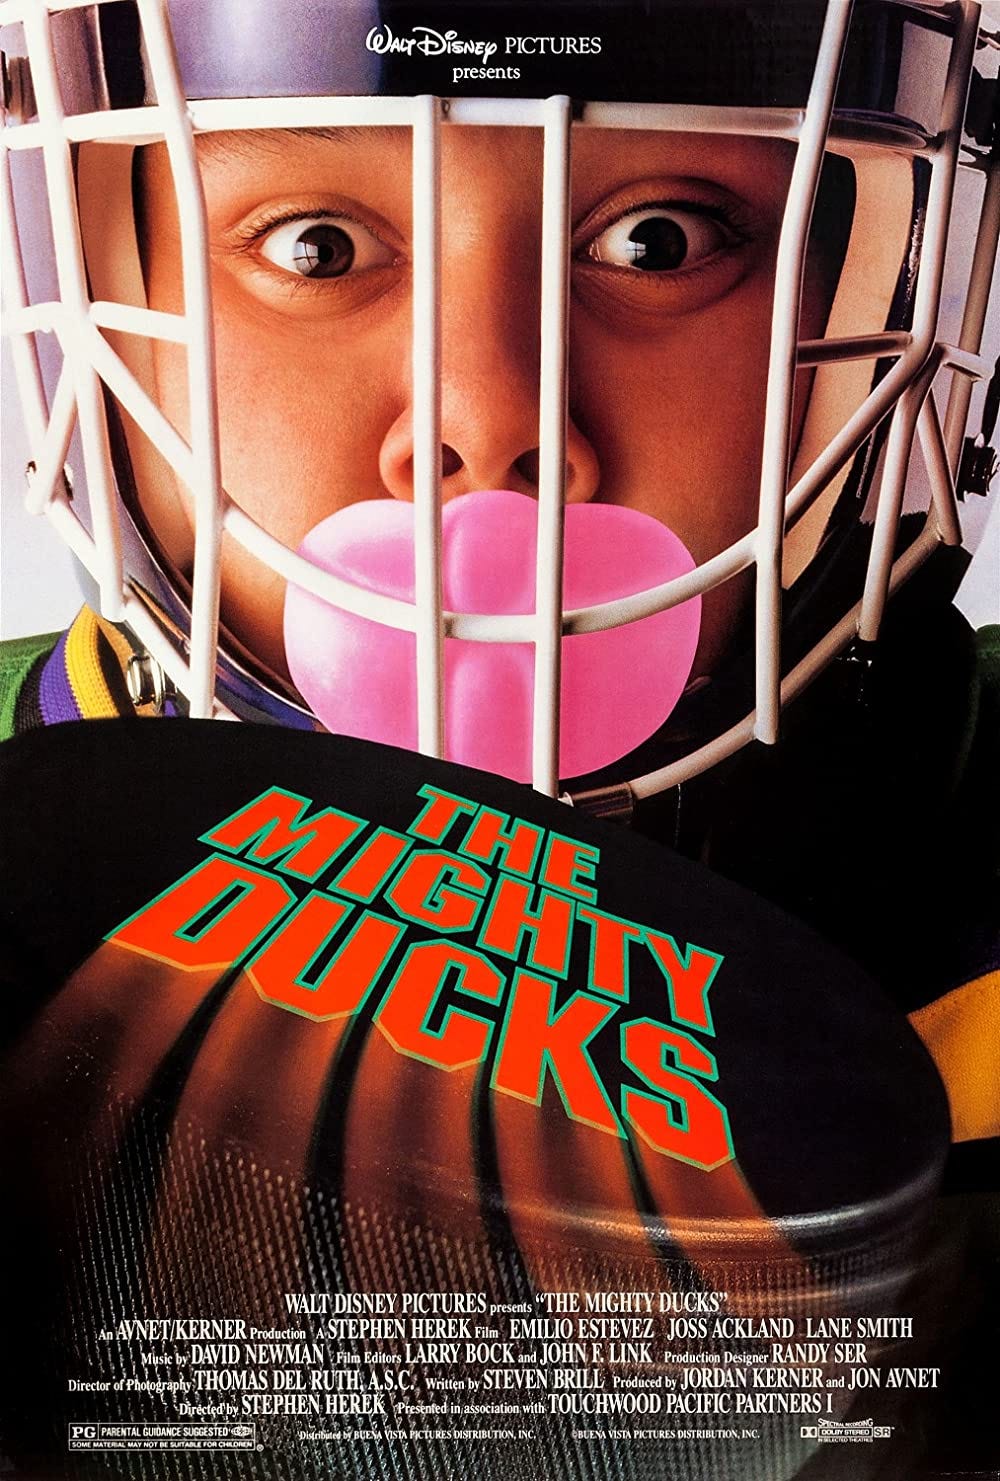 Why Disney turned The Mighty Ducks movie into an actual NHL